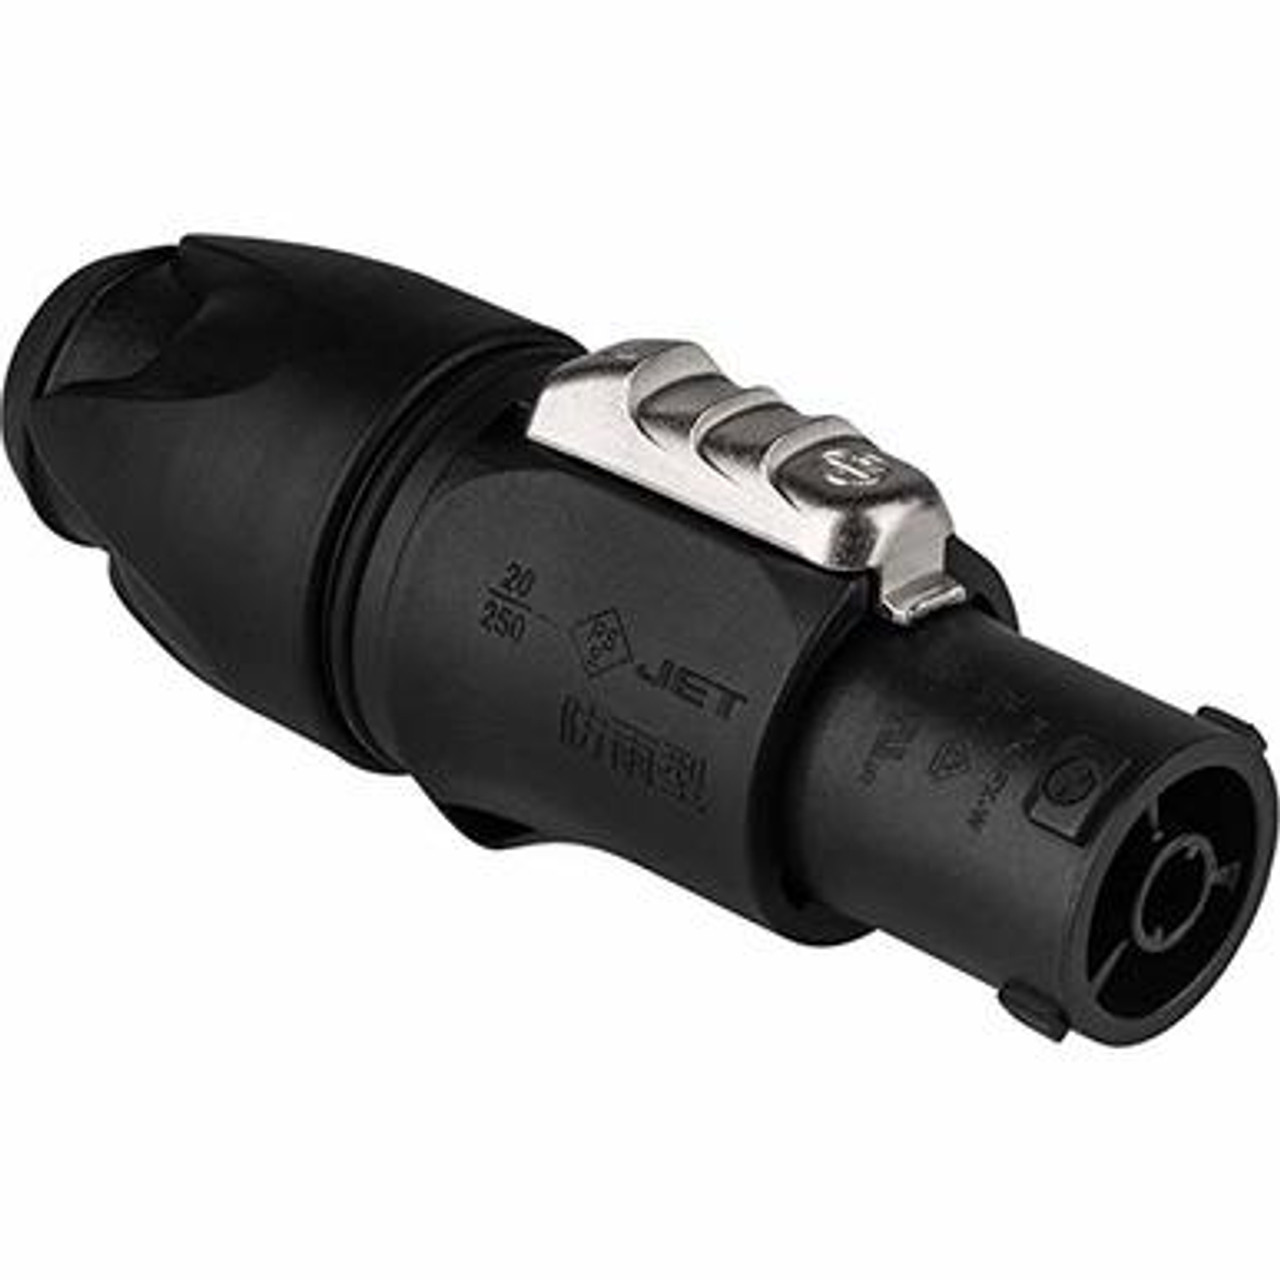 Neutrik NAC3FX-W-TOP powerCON True Outdoor Protection IP65 Locking Female  Cable Connector 20A